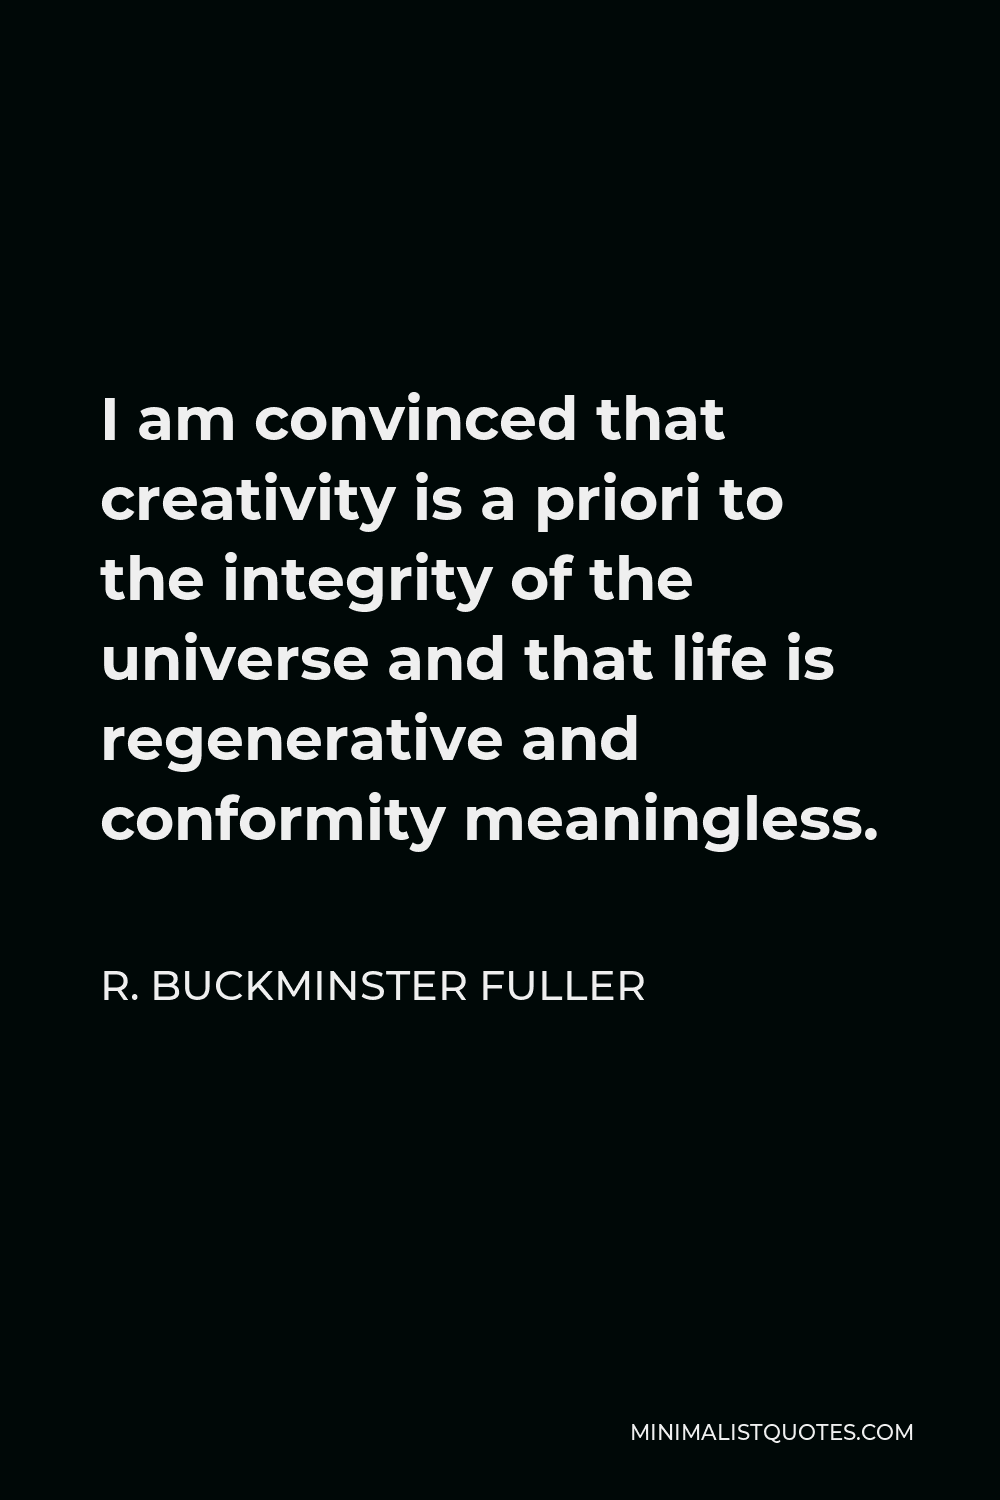 R. Buckminster Fuller Quote - I am convinced that creativity is a priori to the integrity of the universe and that life is regenerative and conformity meaningless.